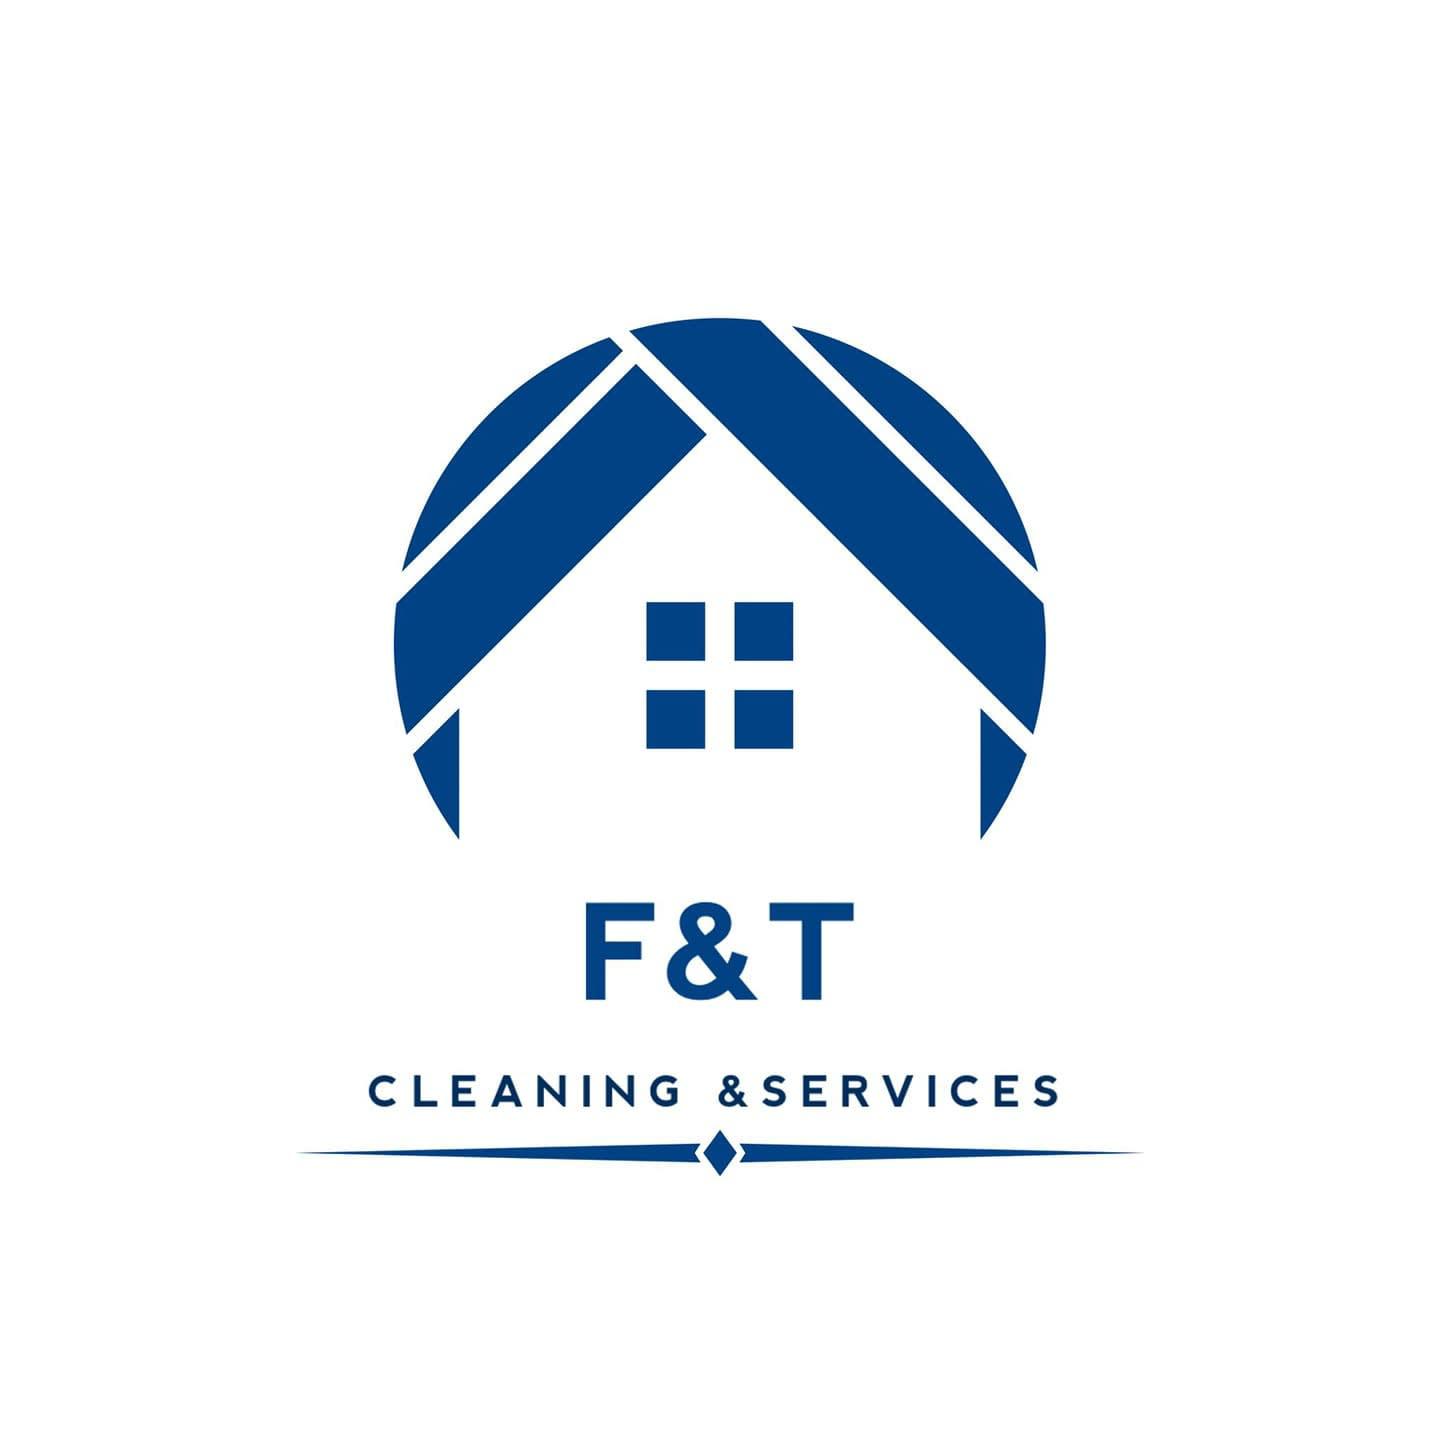 F & T Cleaning and Services Ltd - Edinburgh, Midlothian - 07706 958834 | ShowMeLocal.com